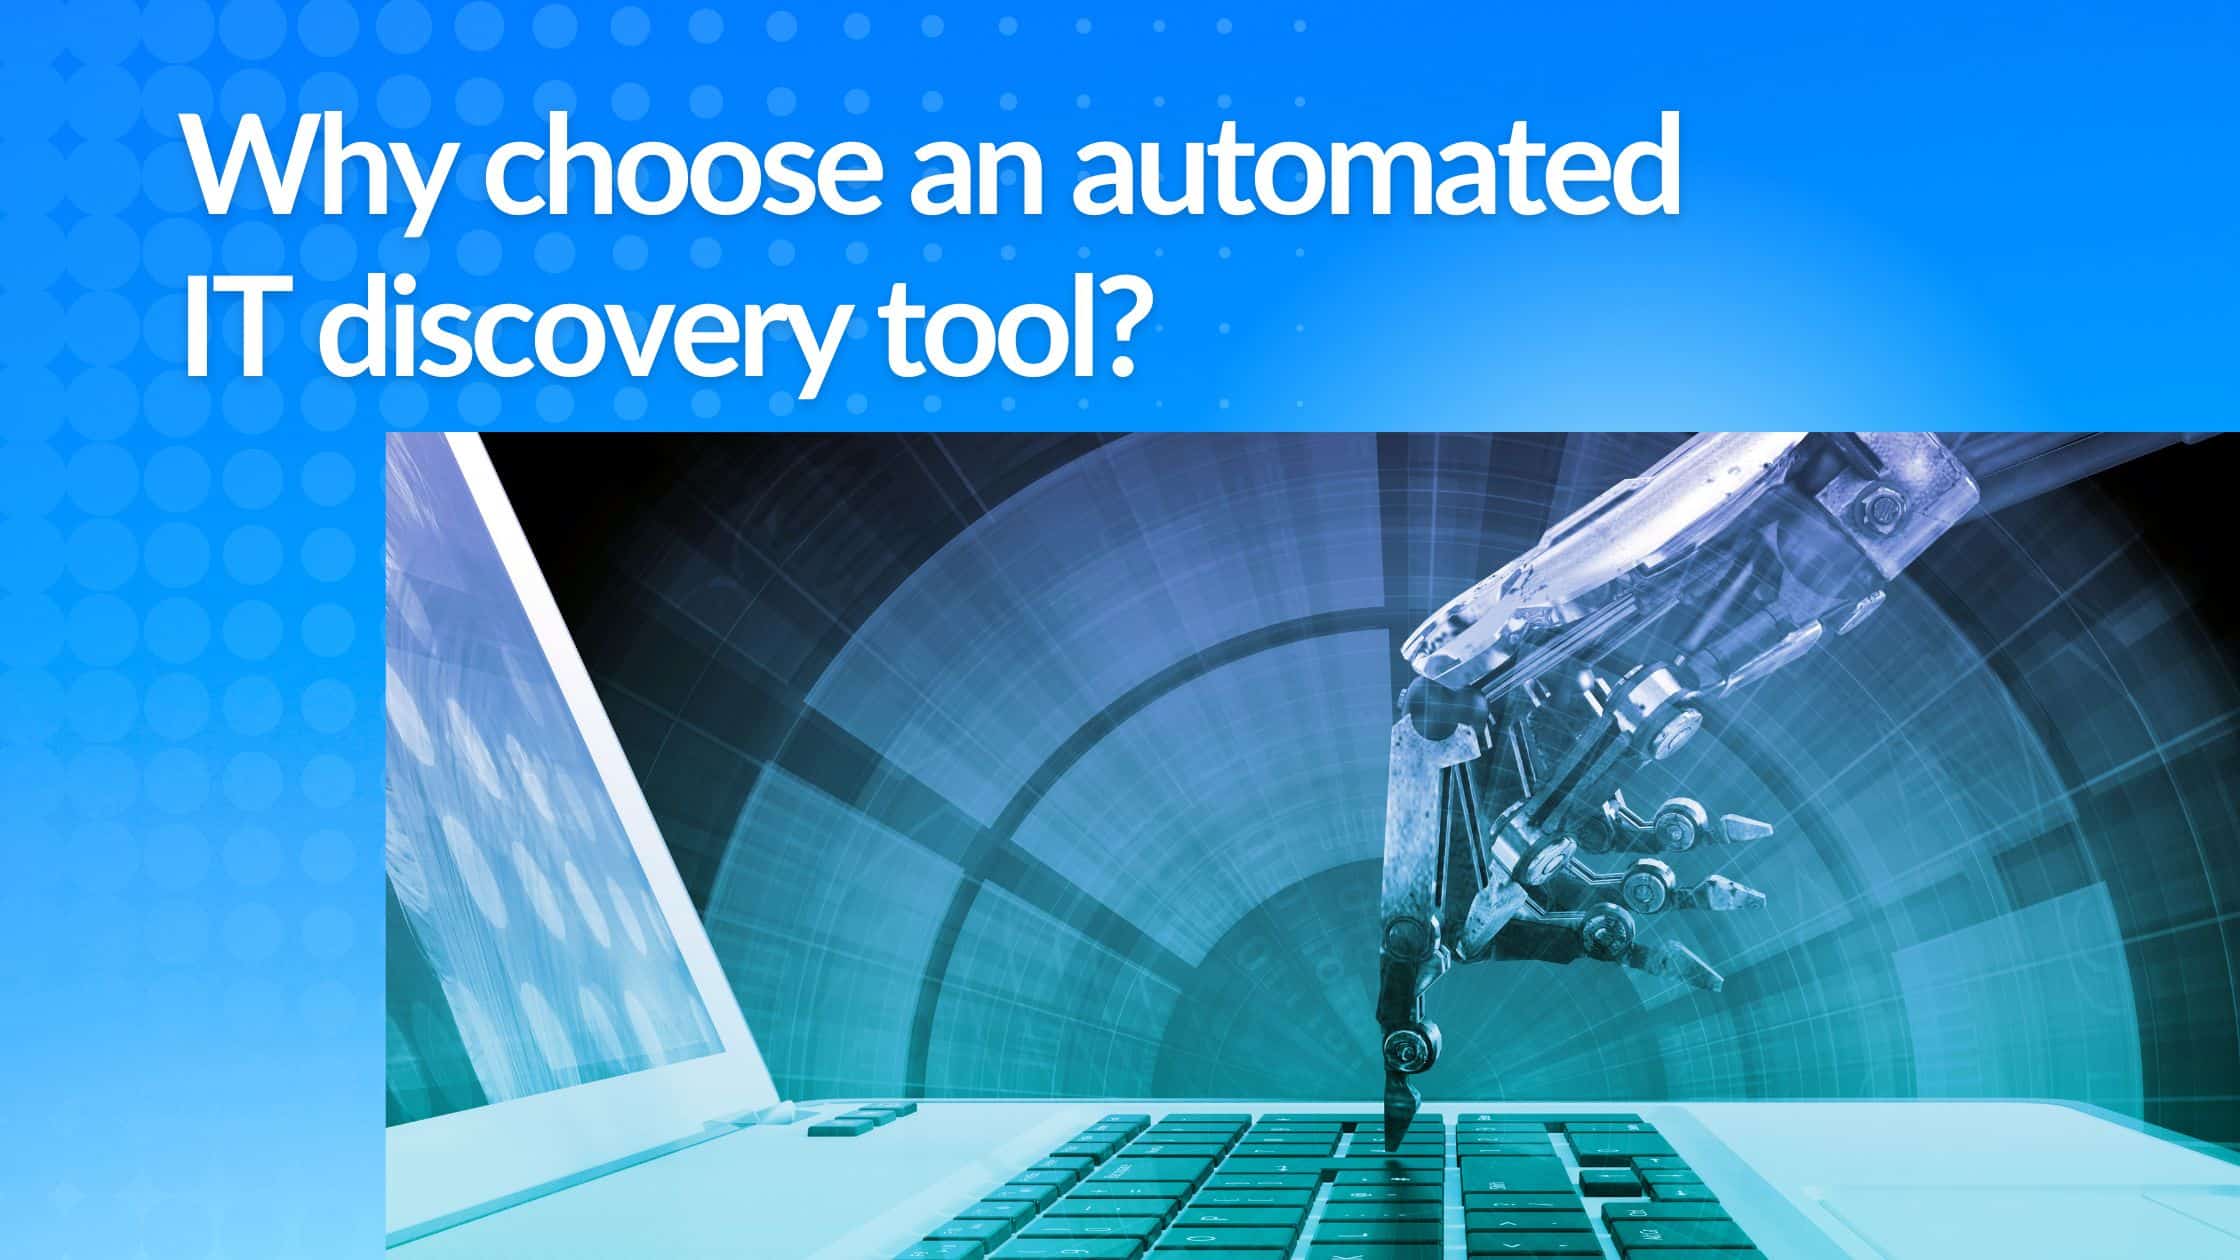 Why choose an automated IT discovery tool?